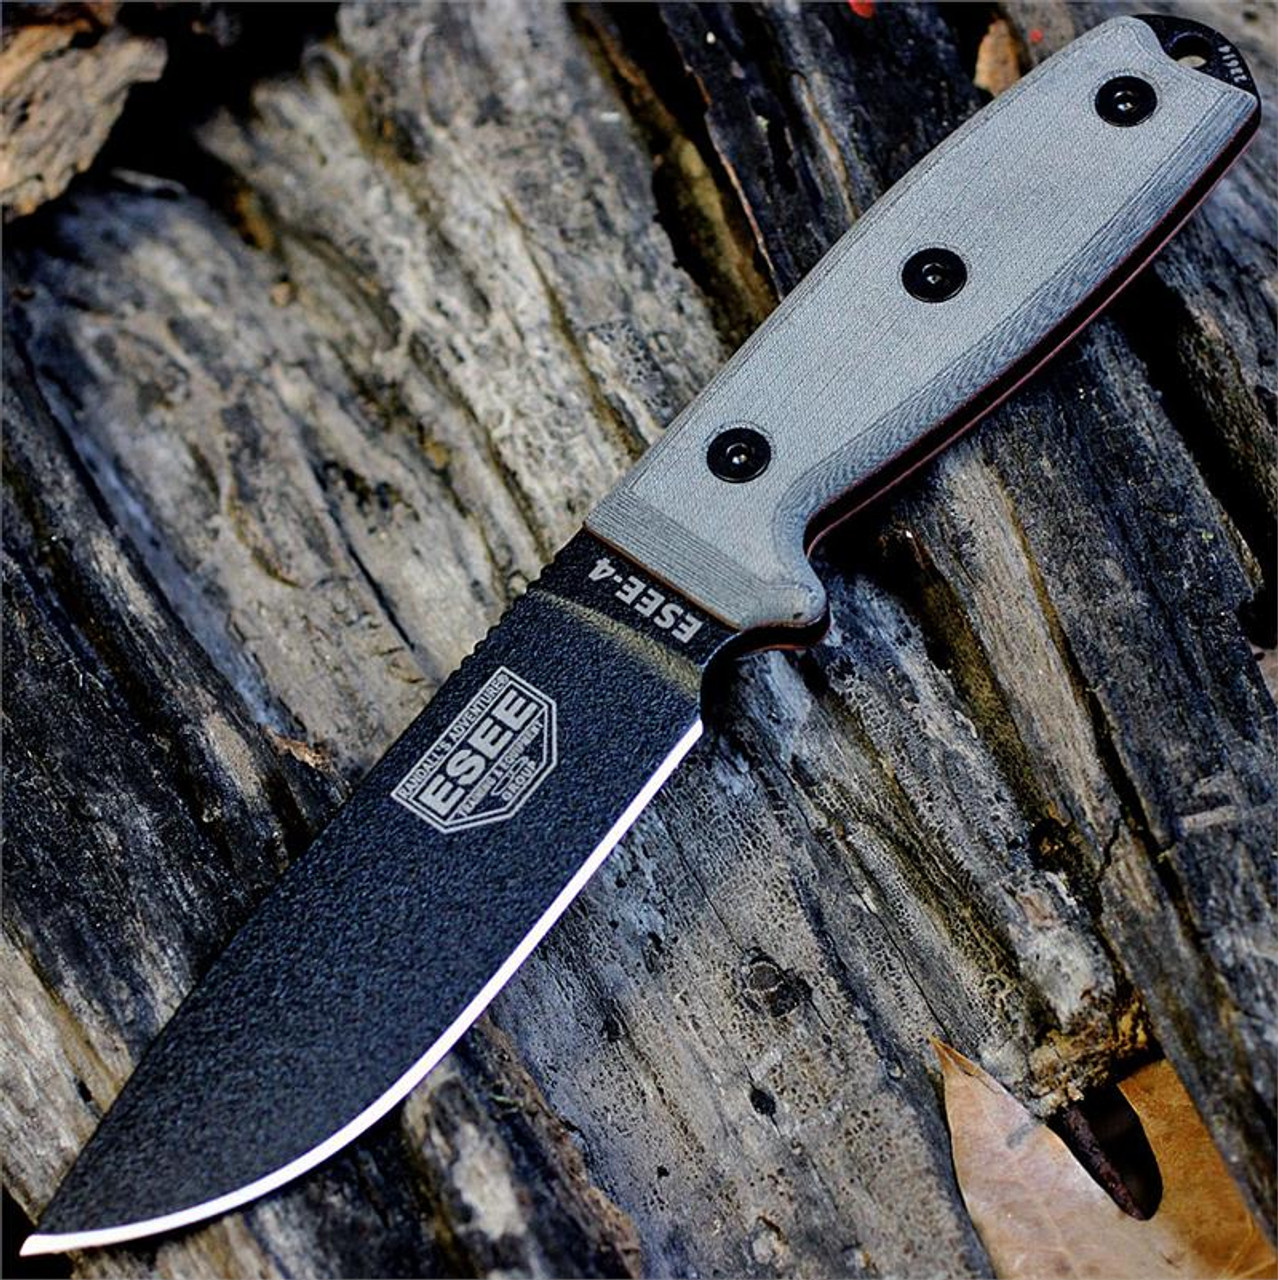 ESEE-4 Fixed Blade (ESEE-4P-KO)-4.5" Black 1095 Drop Point Blade, Gray Micarta Handle | Knife Only